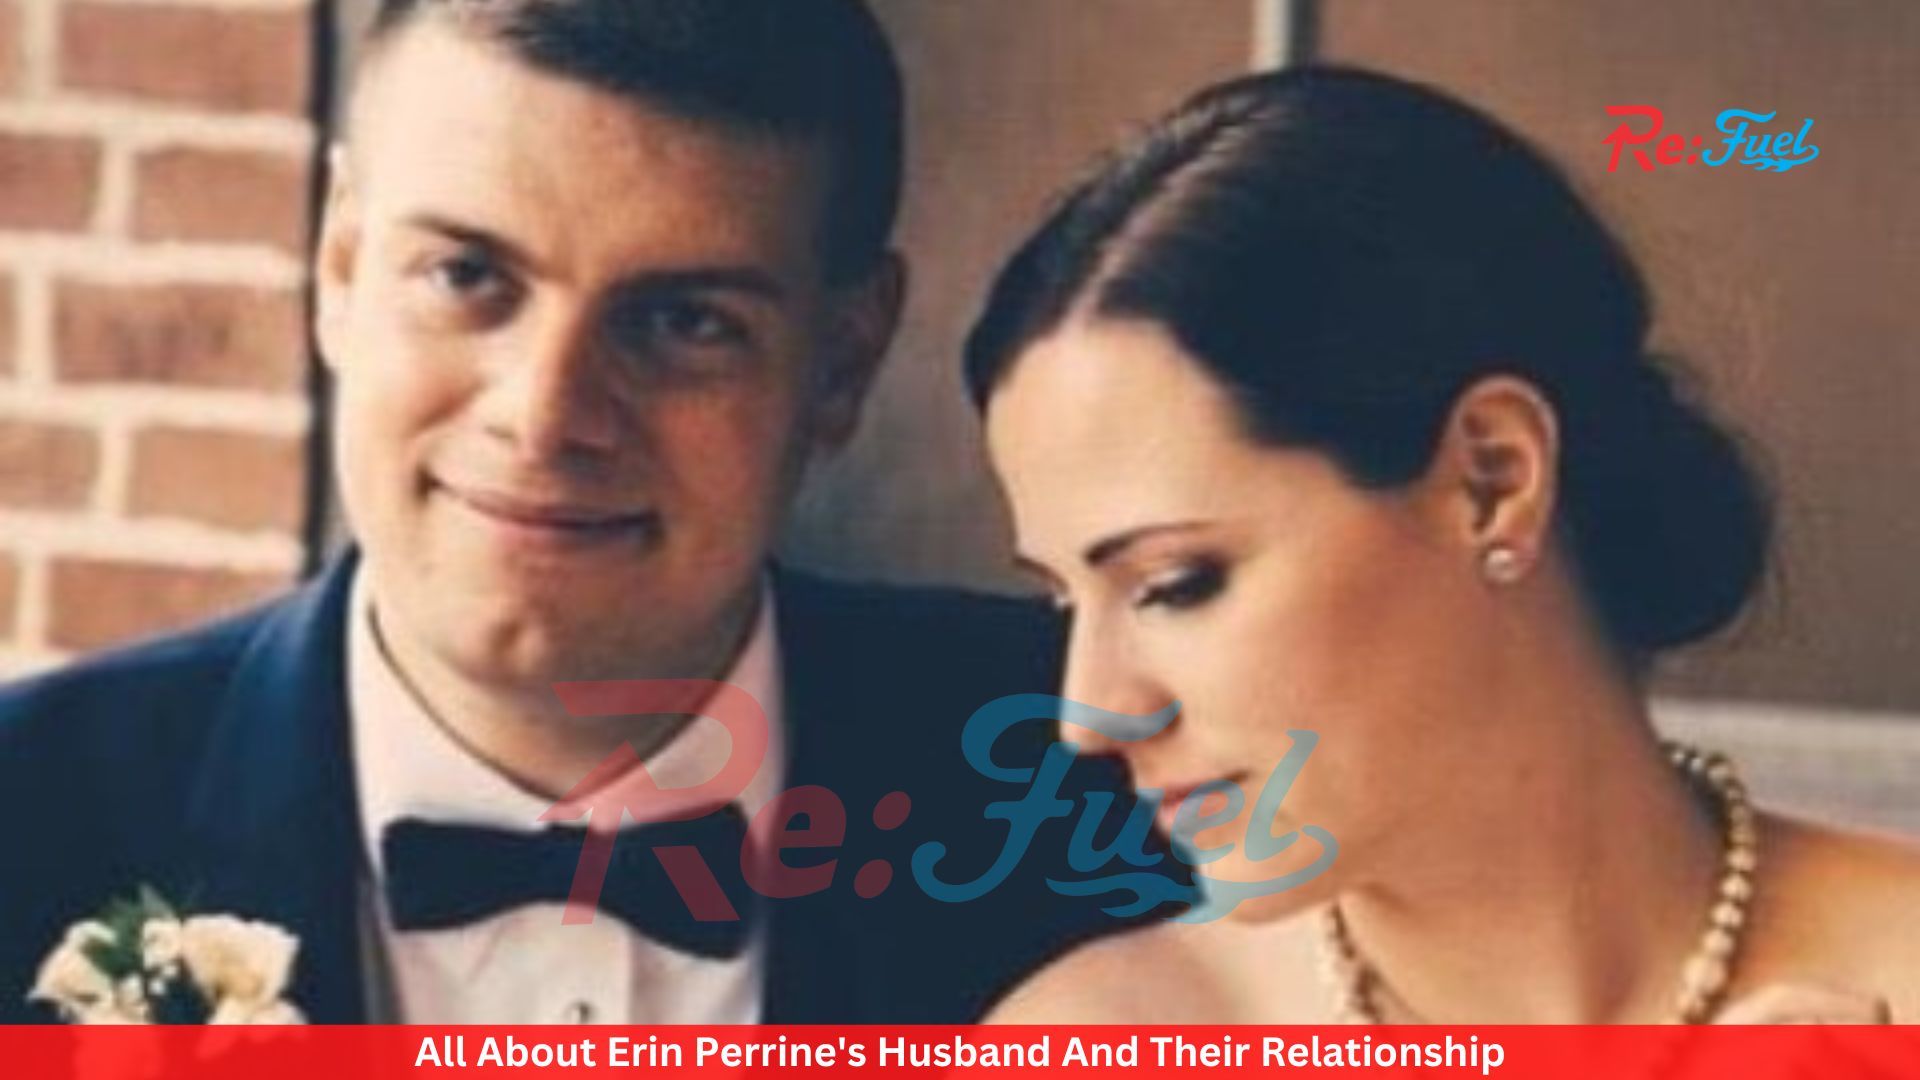 All About Erin Perrine's Husband And Their Relationship